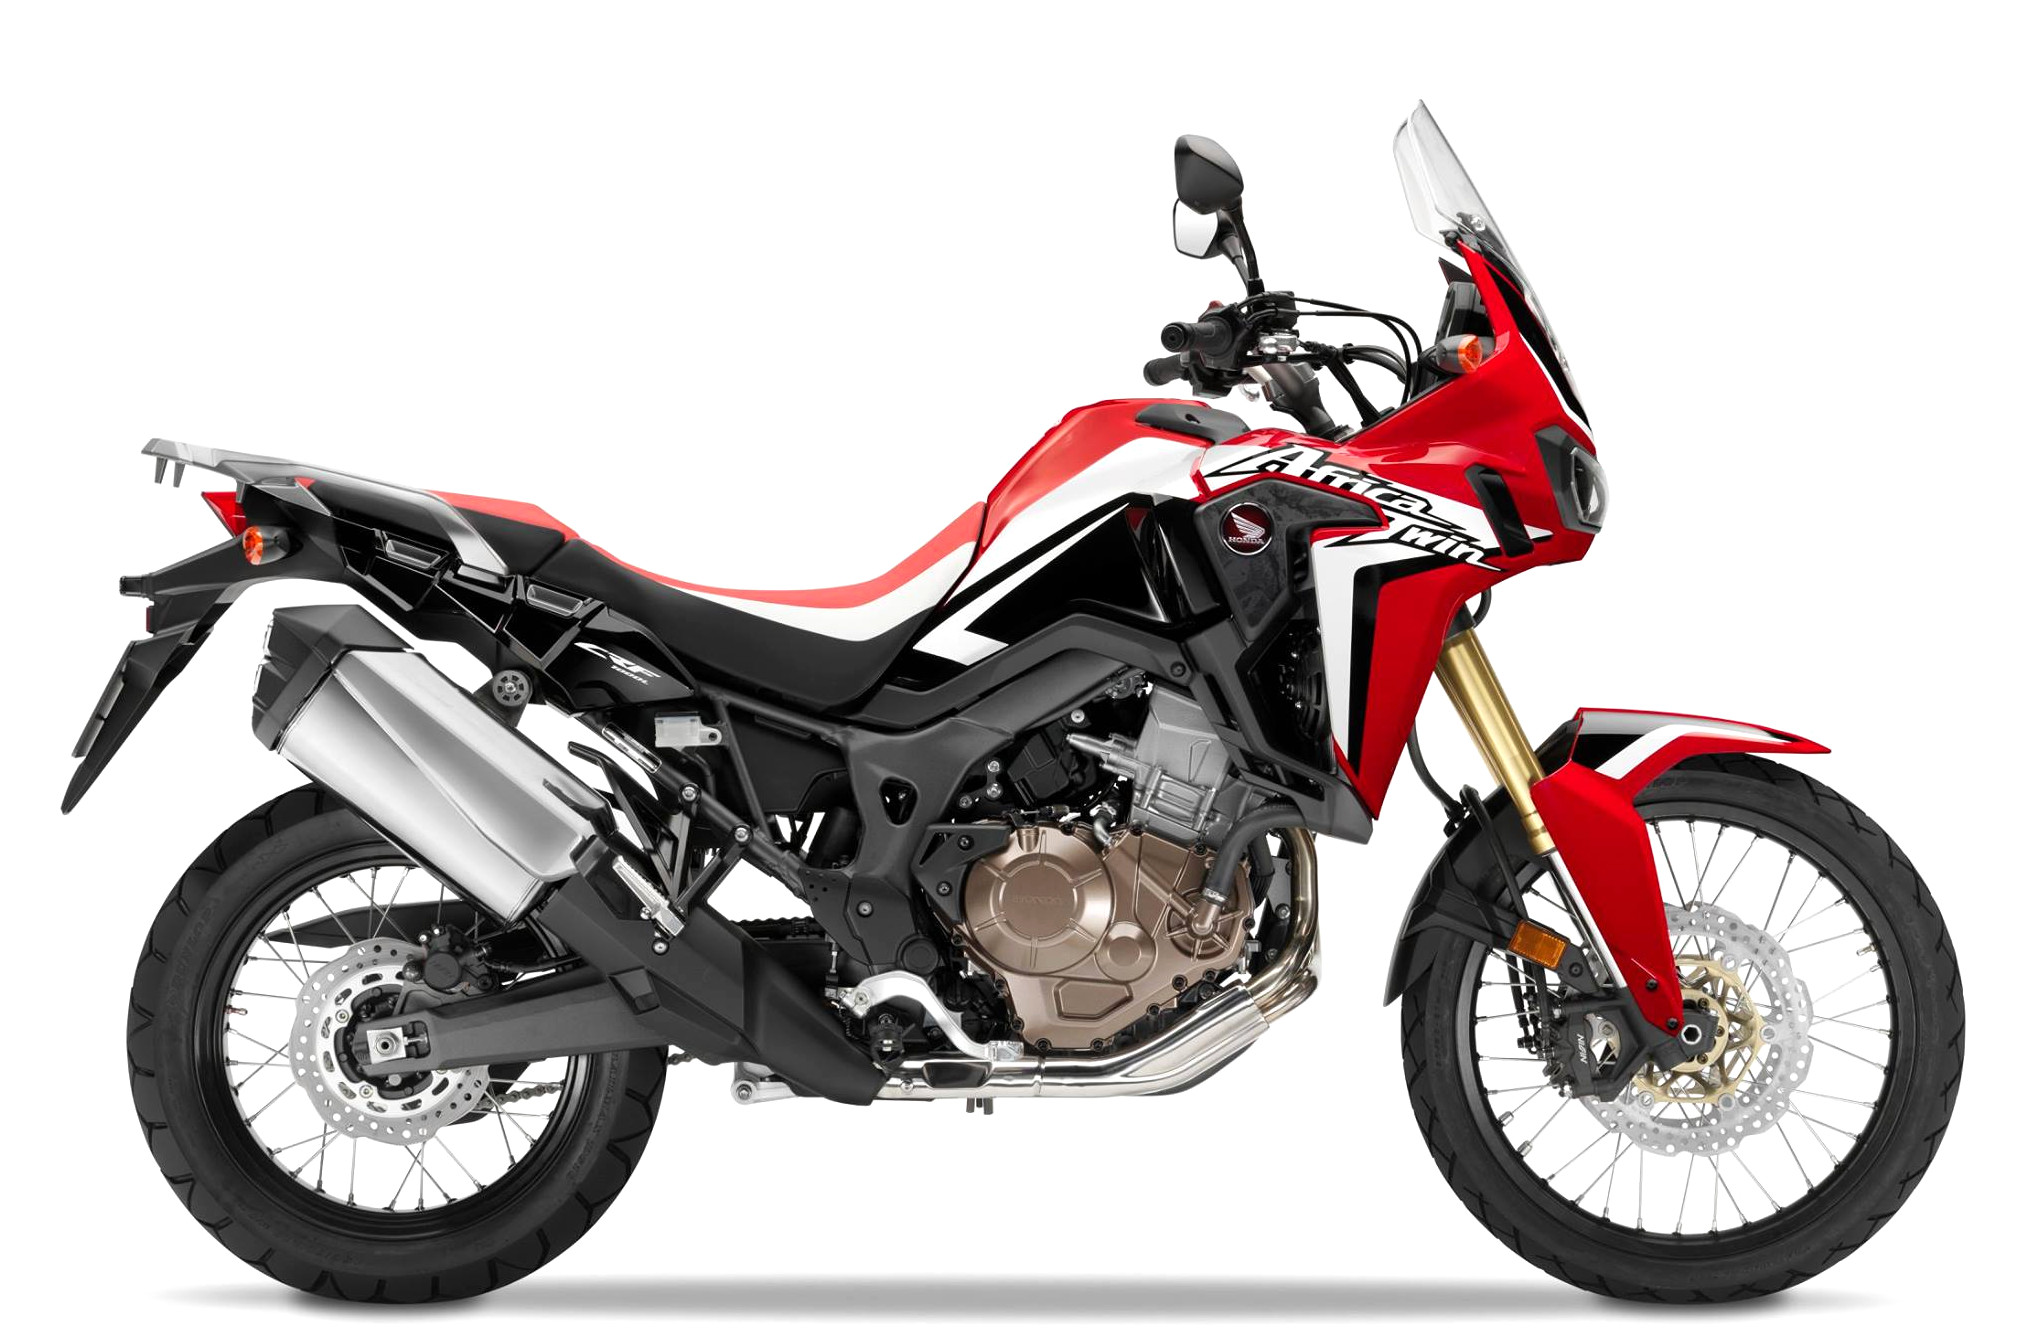 CRF 1000 G Africa Twin (Non ABS)